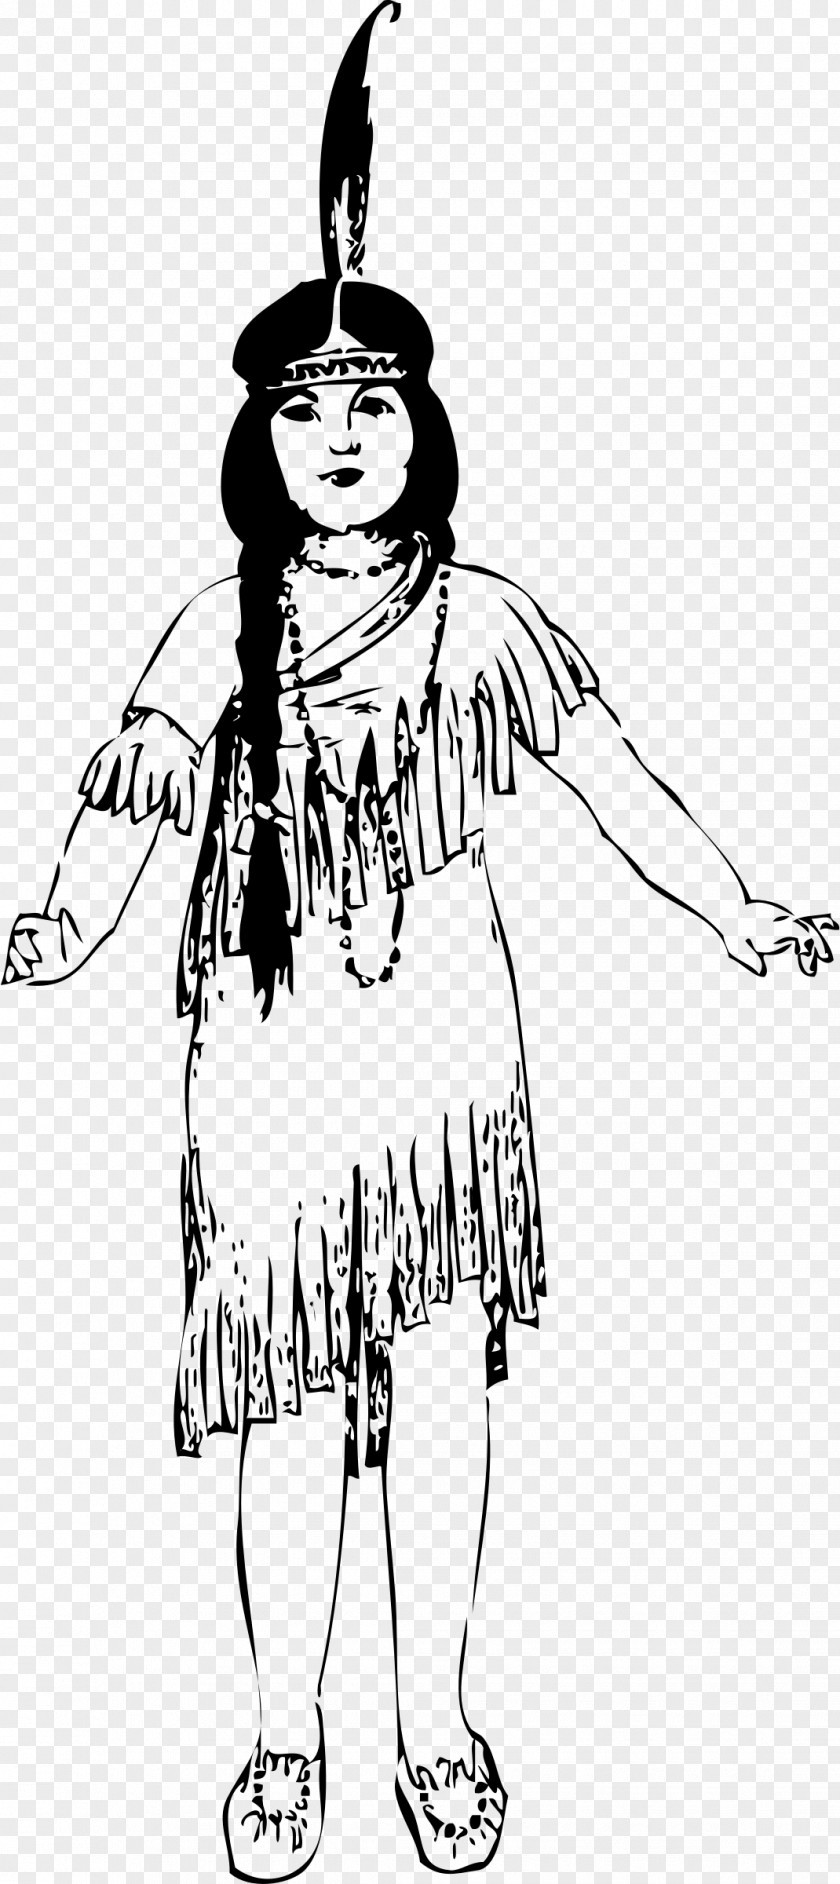 Indians Native Americans In The United States Clip Art PNG